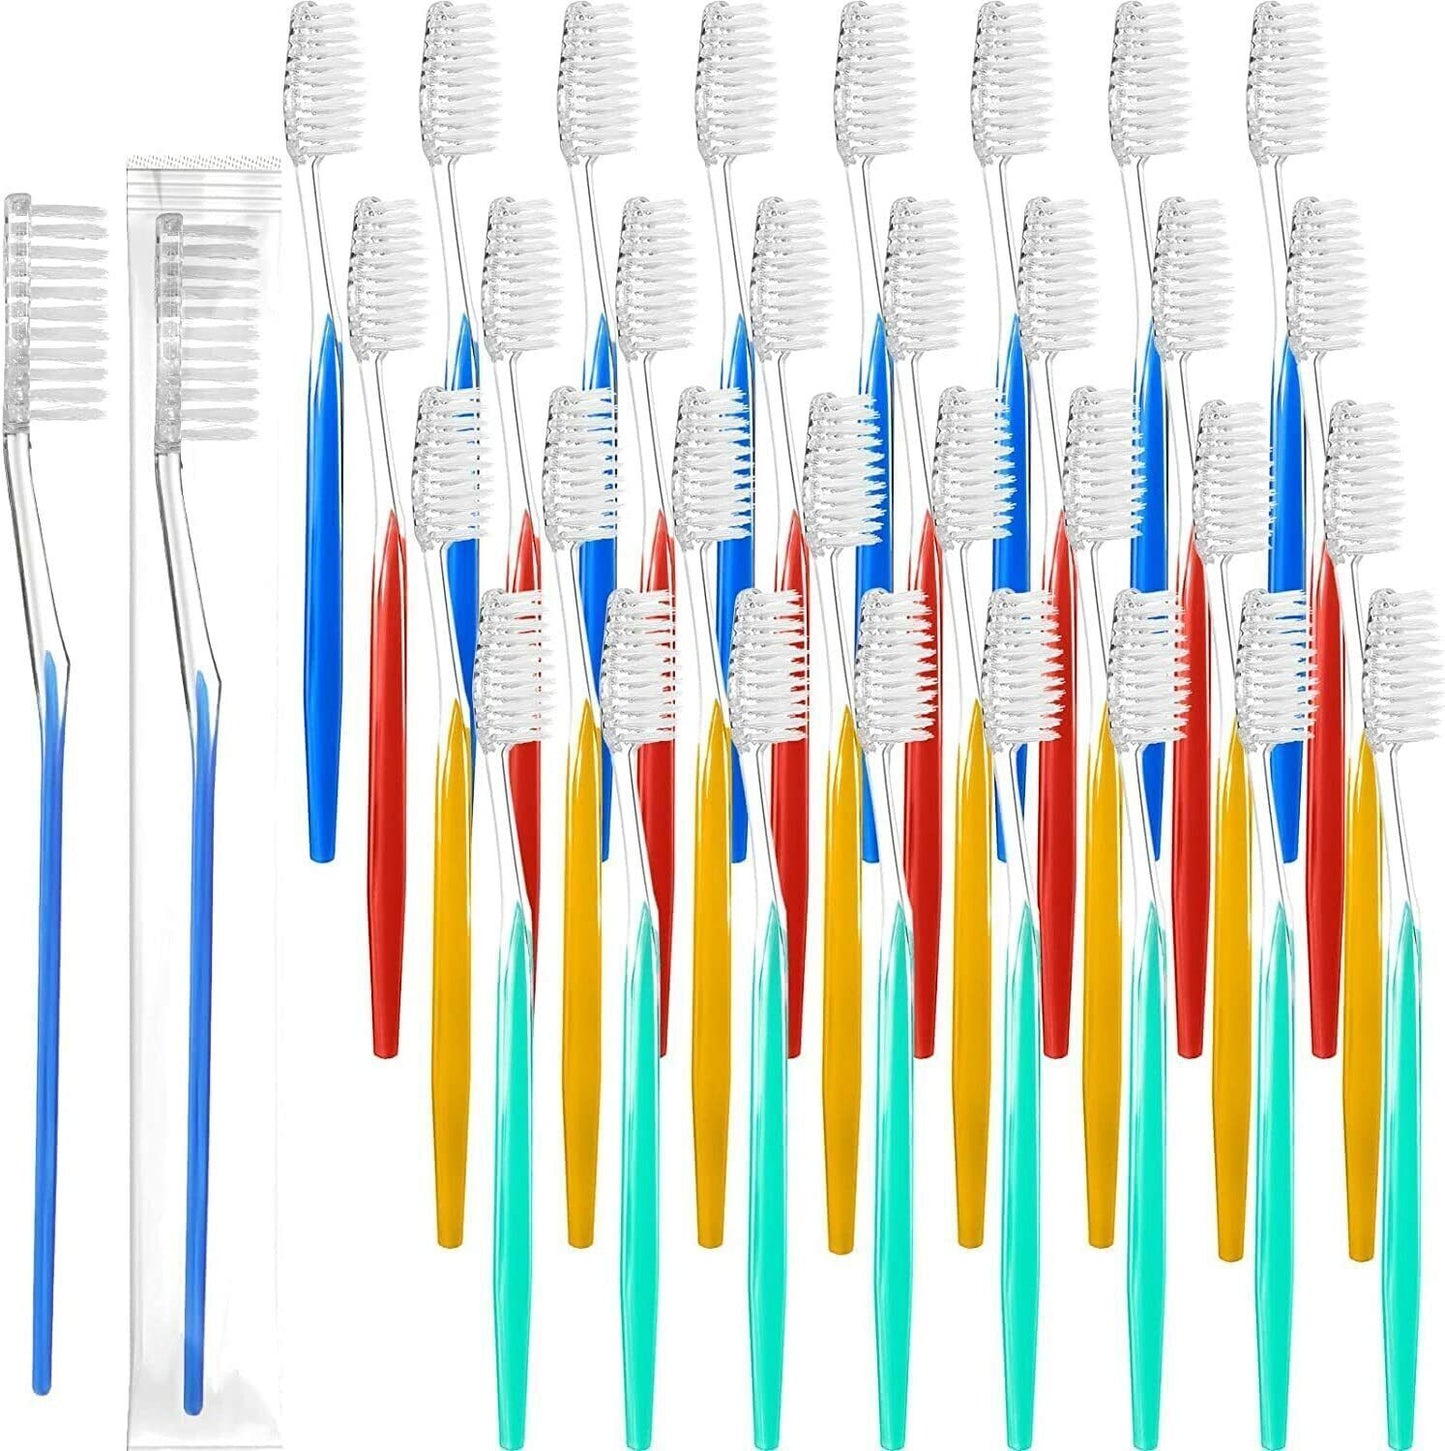 100/200 Toothbrushes lot Bulk Wholesale Standard Classic Toothbrush disposable